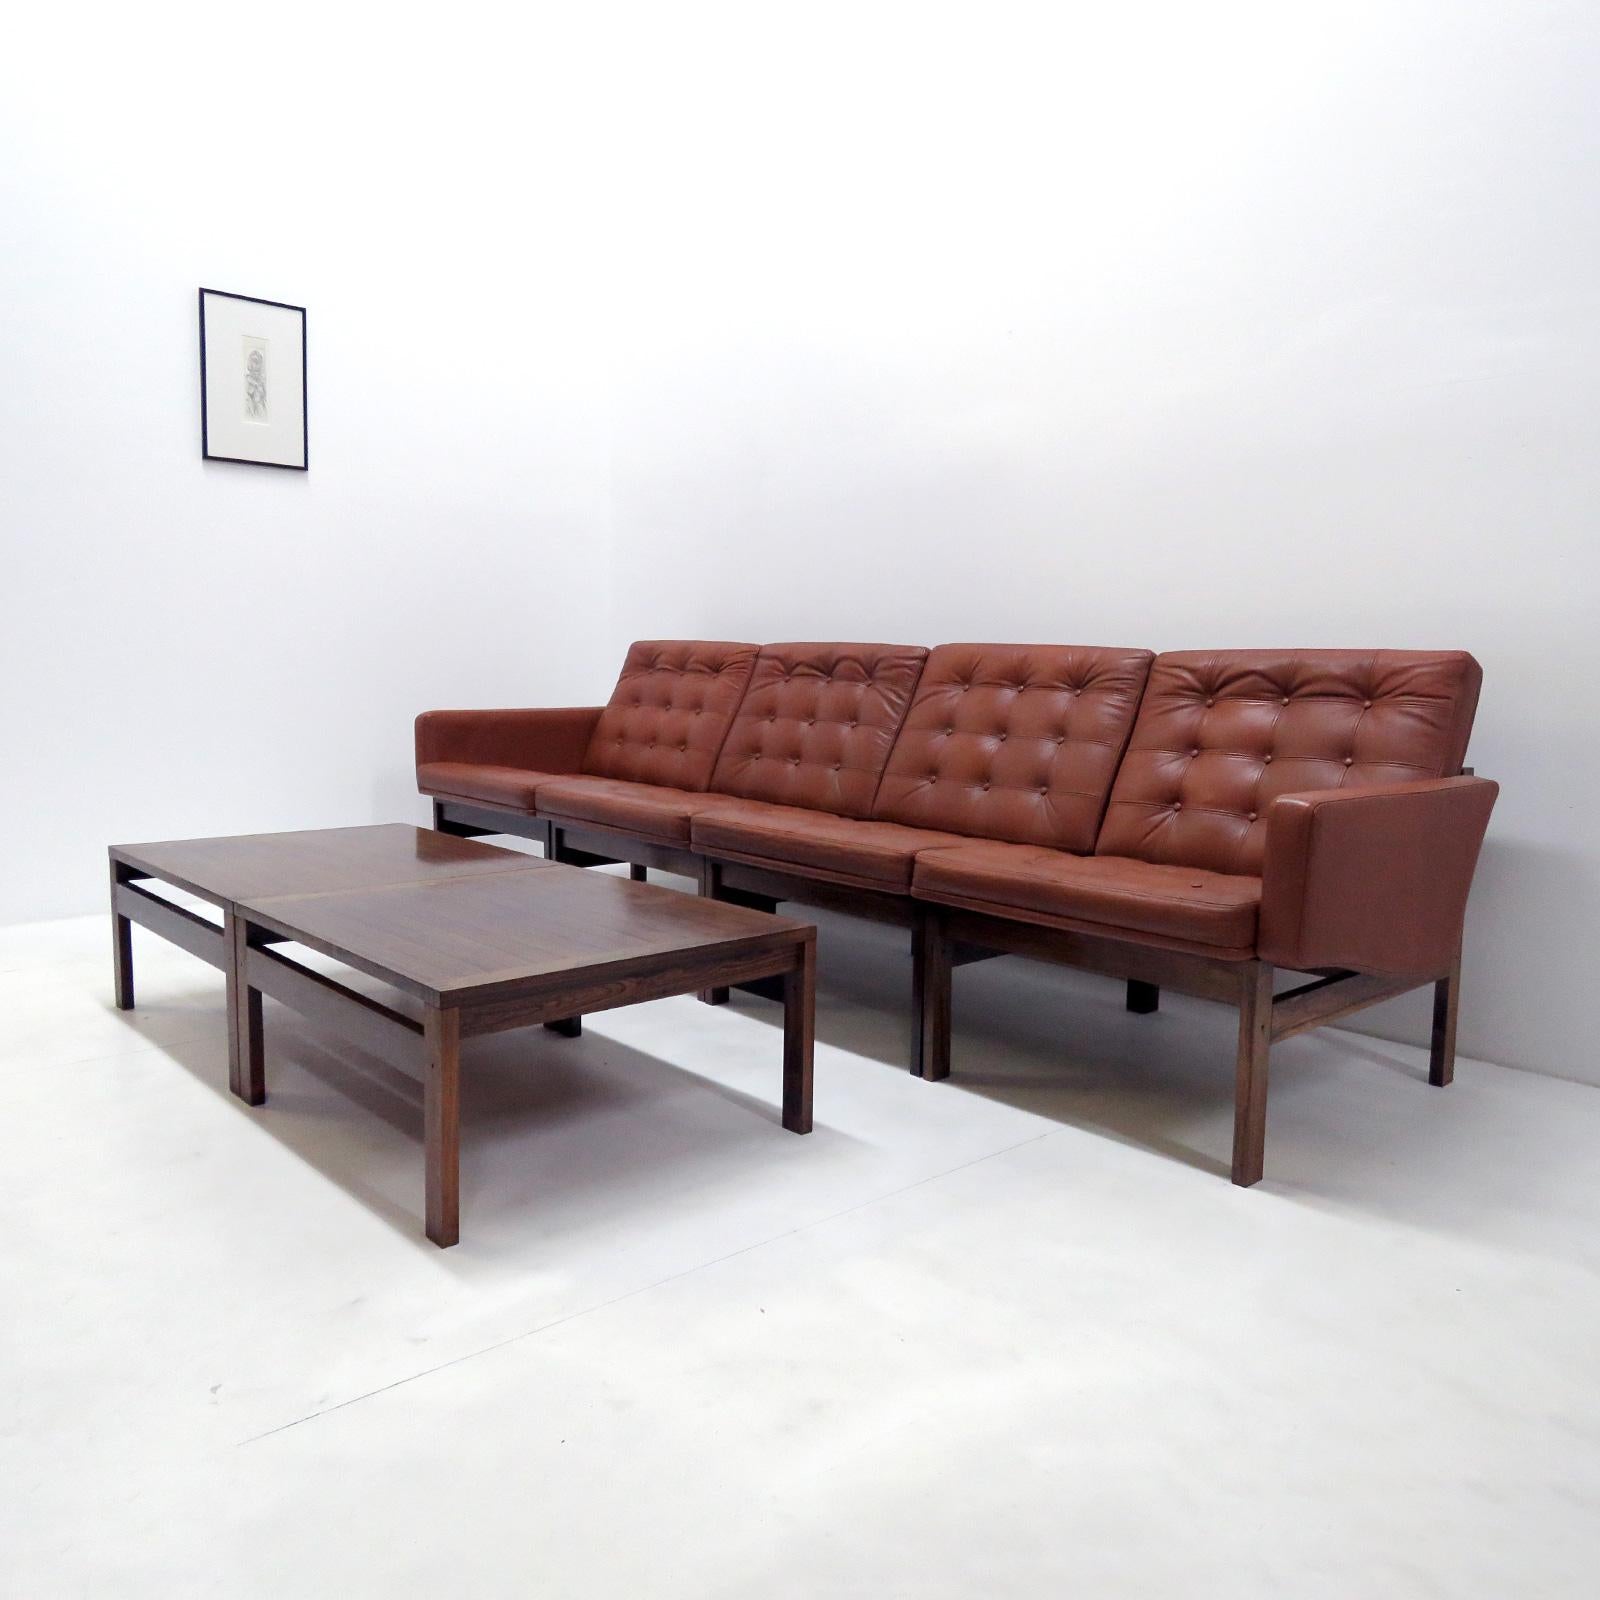 Moduline sofa set designed by Ole Gjerlov Knudsen & Torben Lind, manufactured by France & Son, Denmark 1962. This modular set contains four seating elements, (two of which with one arm each) and two low solid rosewood side tables. The sofa has a